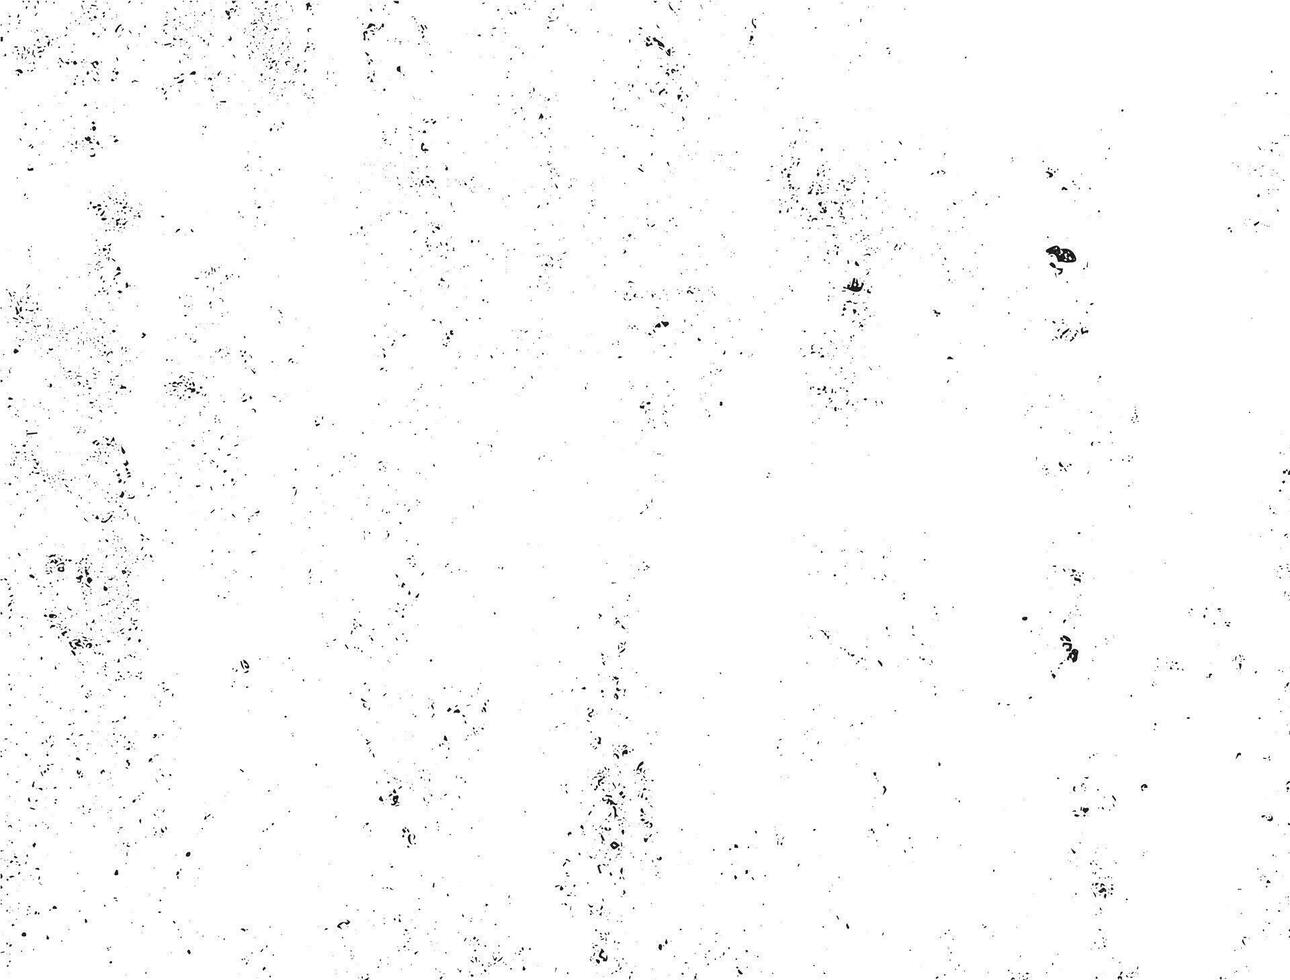 Abstract vector noise. Small particles of debris and dust. Distressed uneven background. Grunge texture overlay with rough and fine grains isolated on white background. Vector illustration.